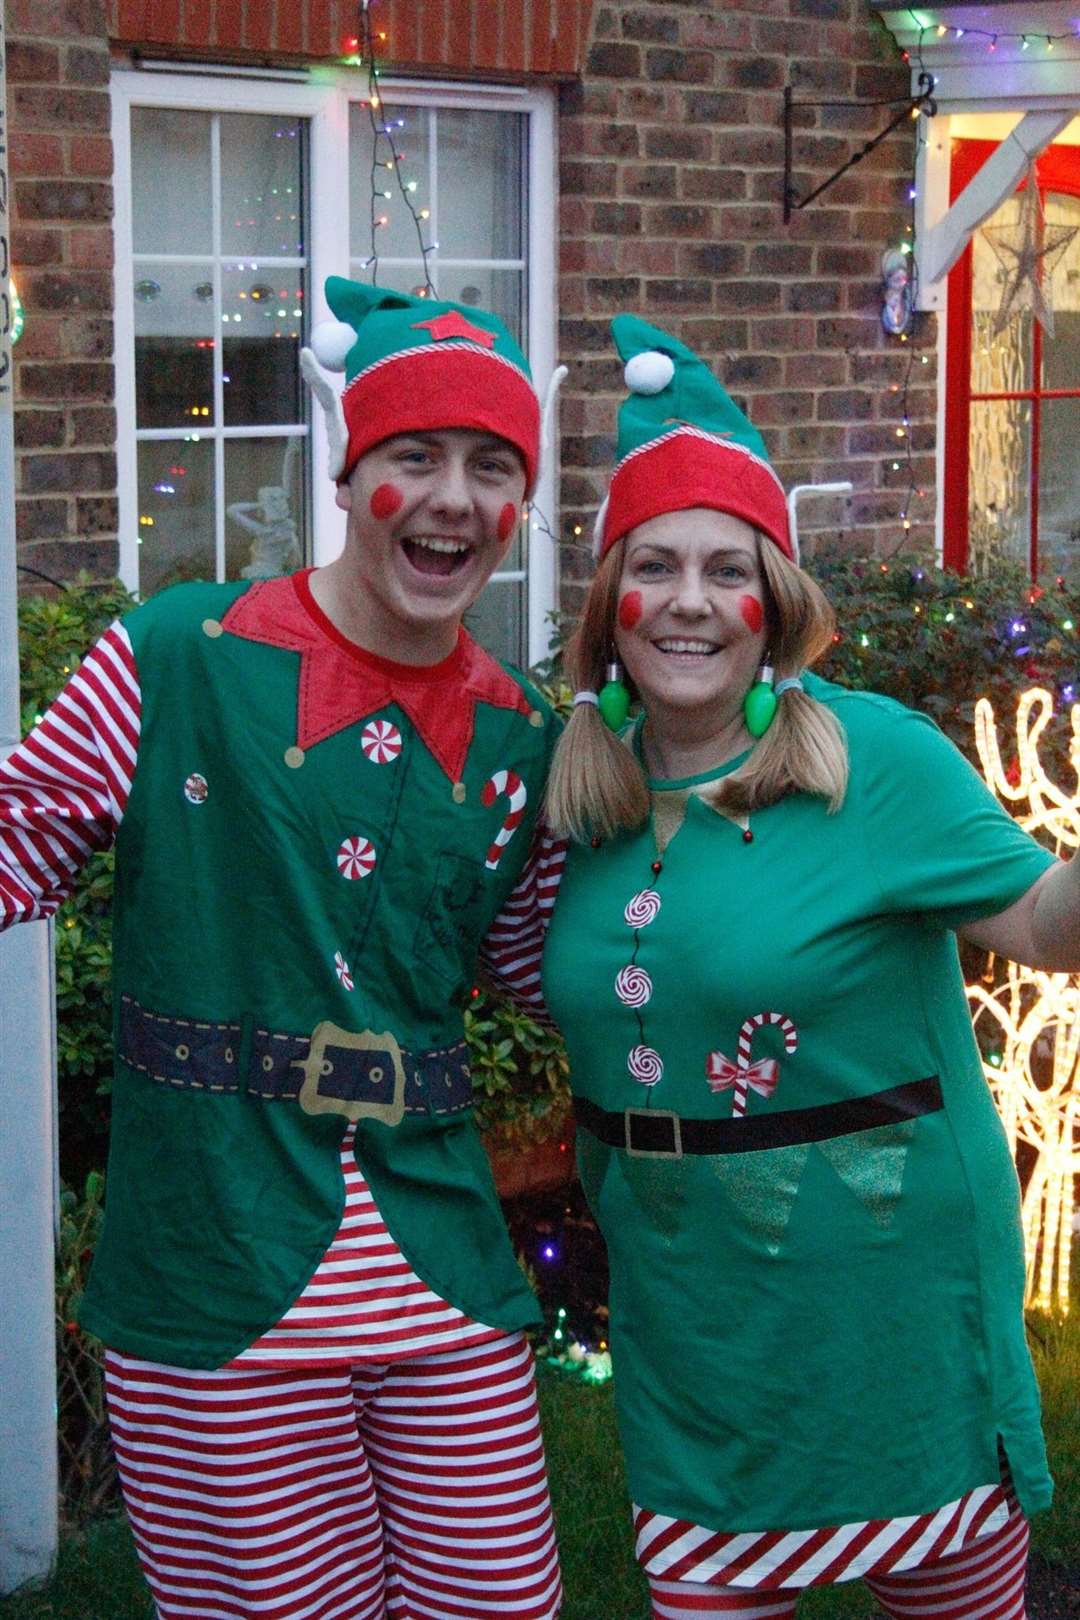 The elves are visiting homes in Swale to spread some Christmas cheer. Picture: ElvesRUs